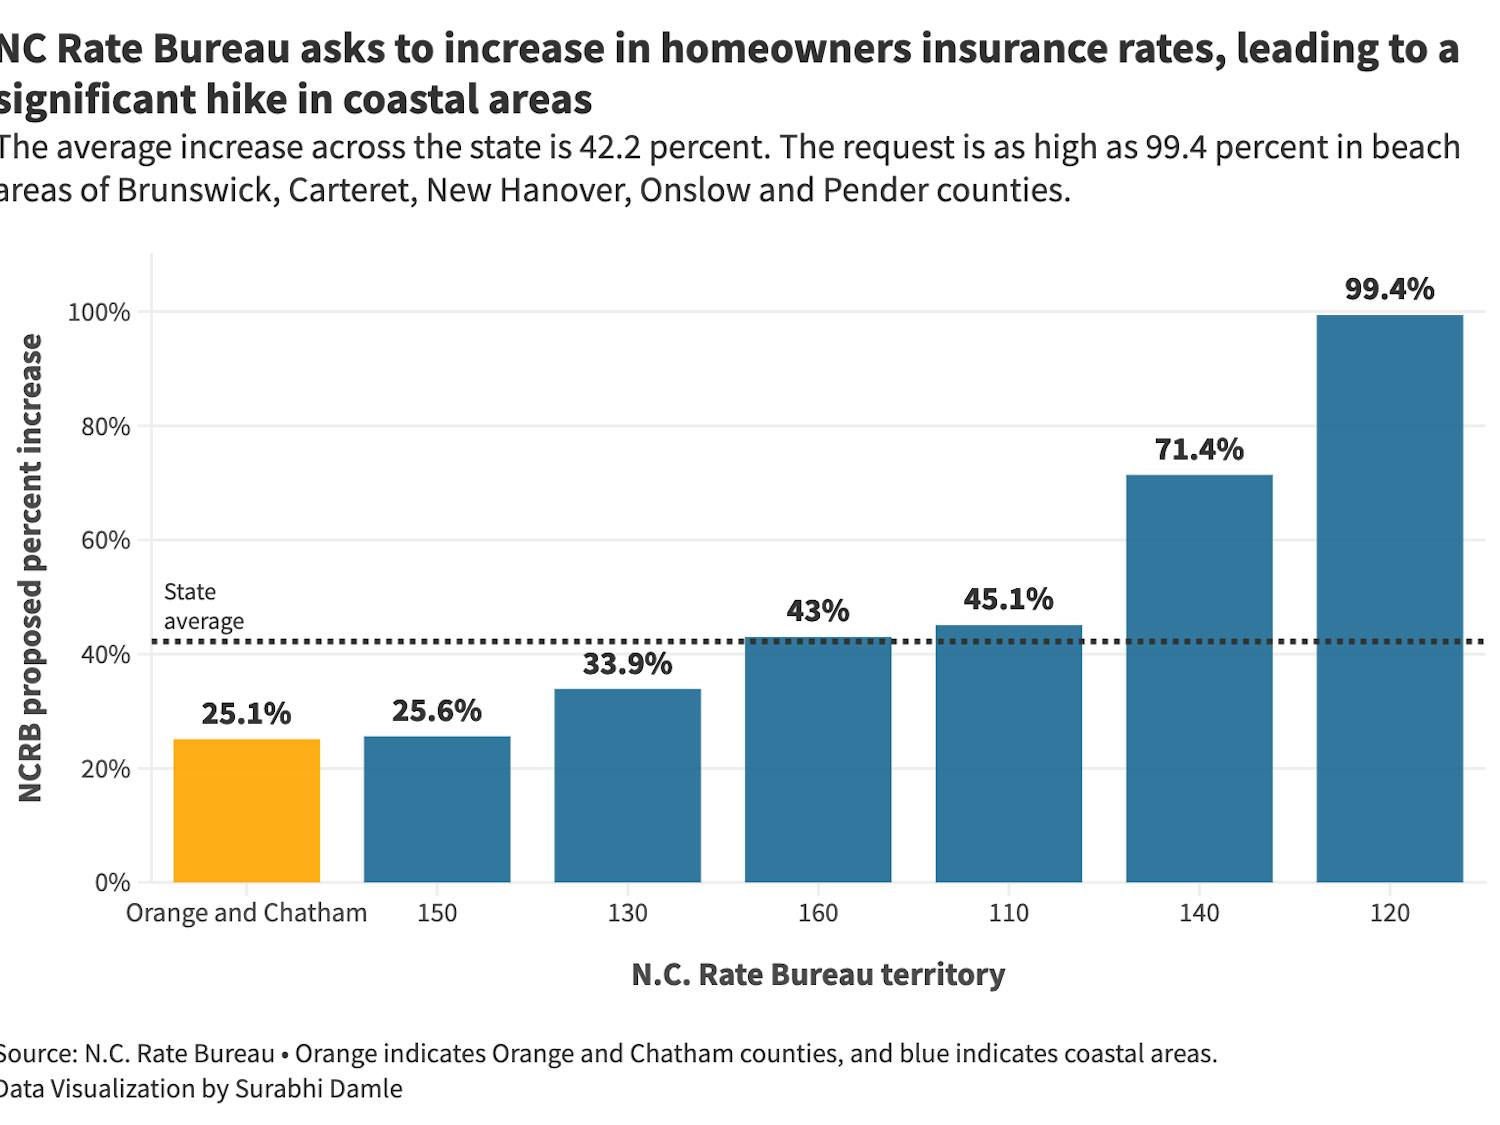 Visualization: N.C. Rate Bureau asks to increase in homeowners insurance rates, leading to a significant hike in coastal areas